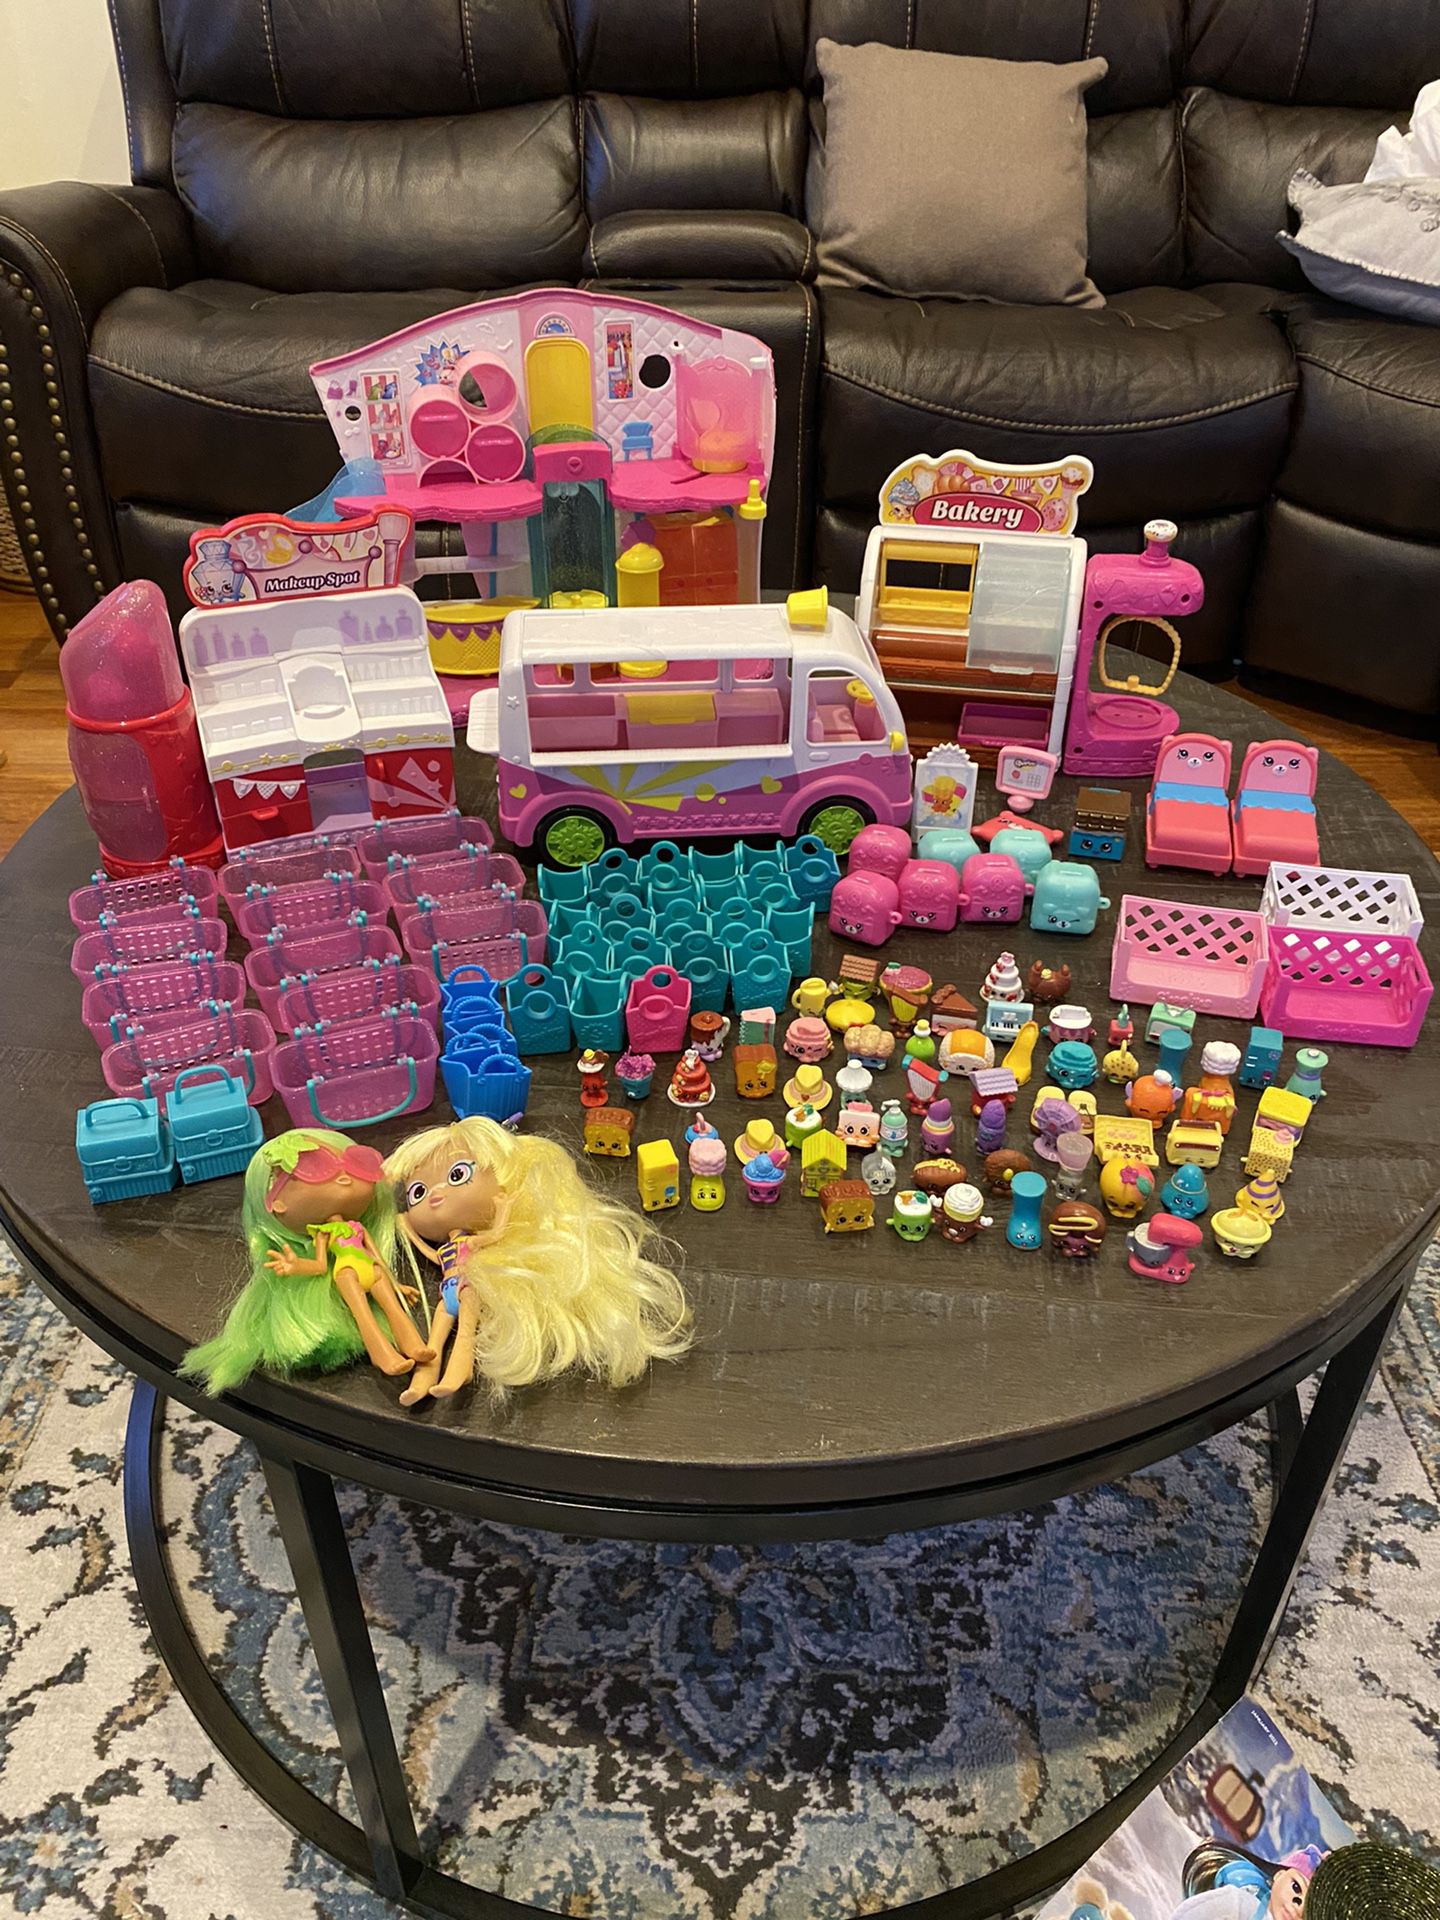 SHOPKINS  62 Figures 6 Sets Everything You See On The Table 2  Dolls All Figures Have Shopping Bags And Charts